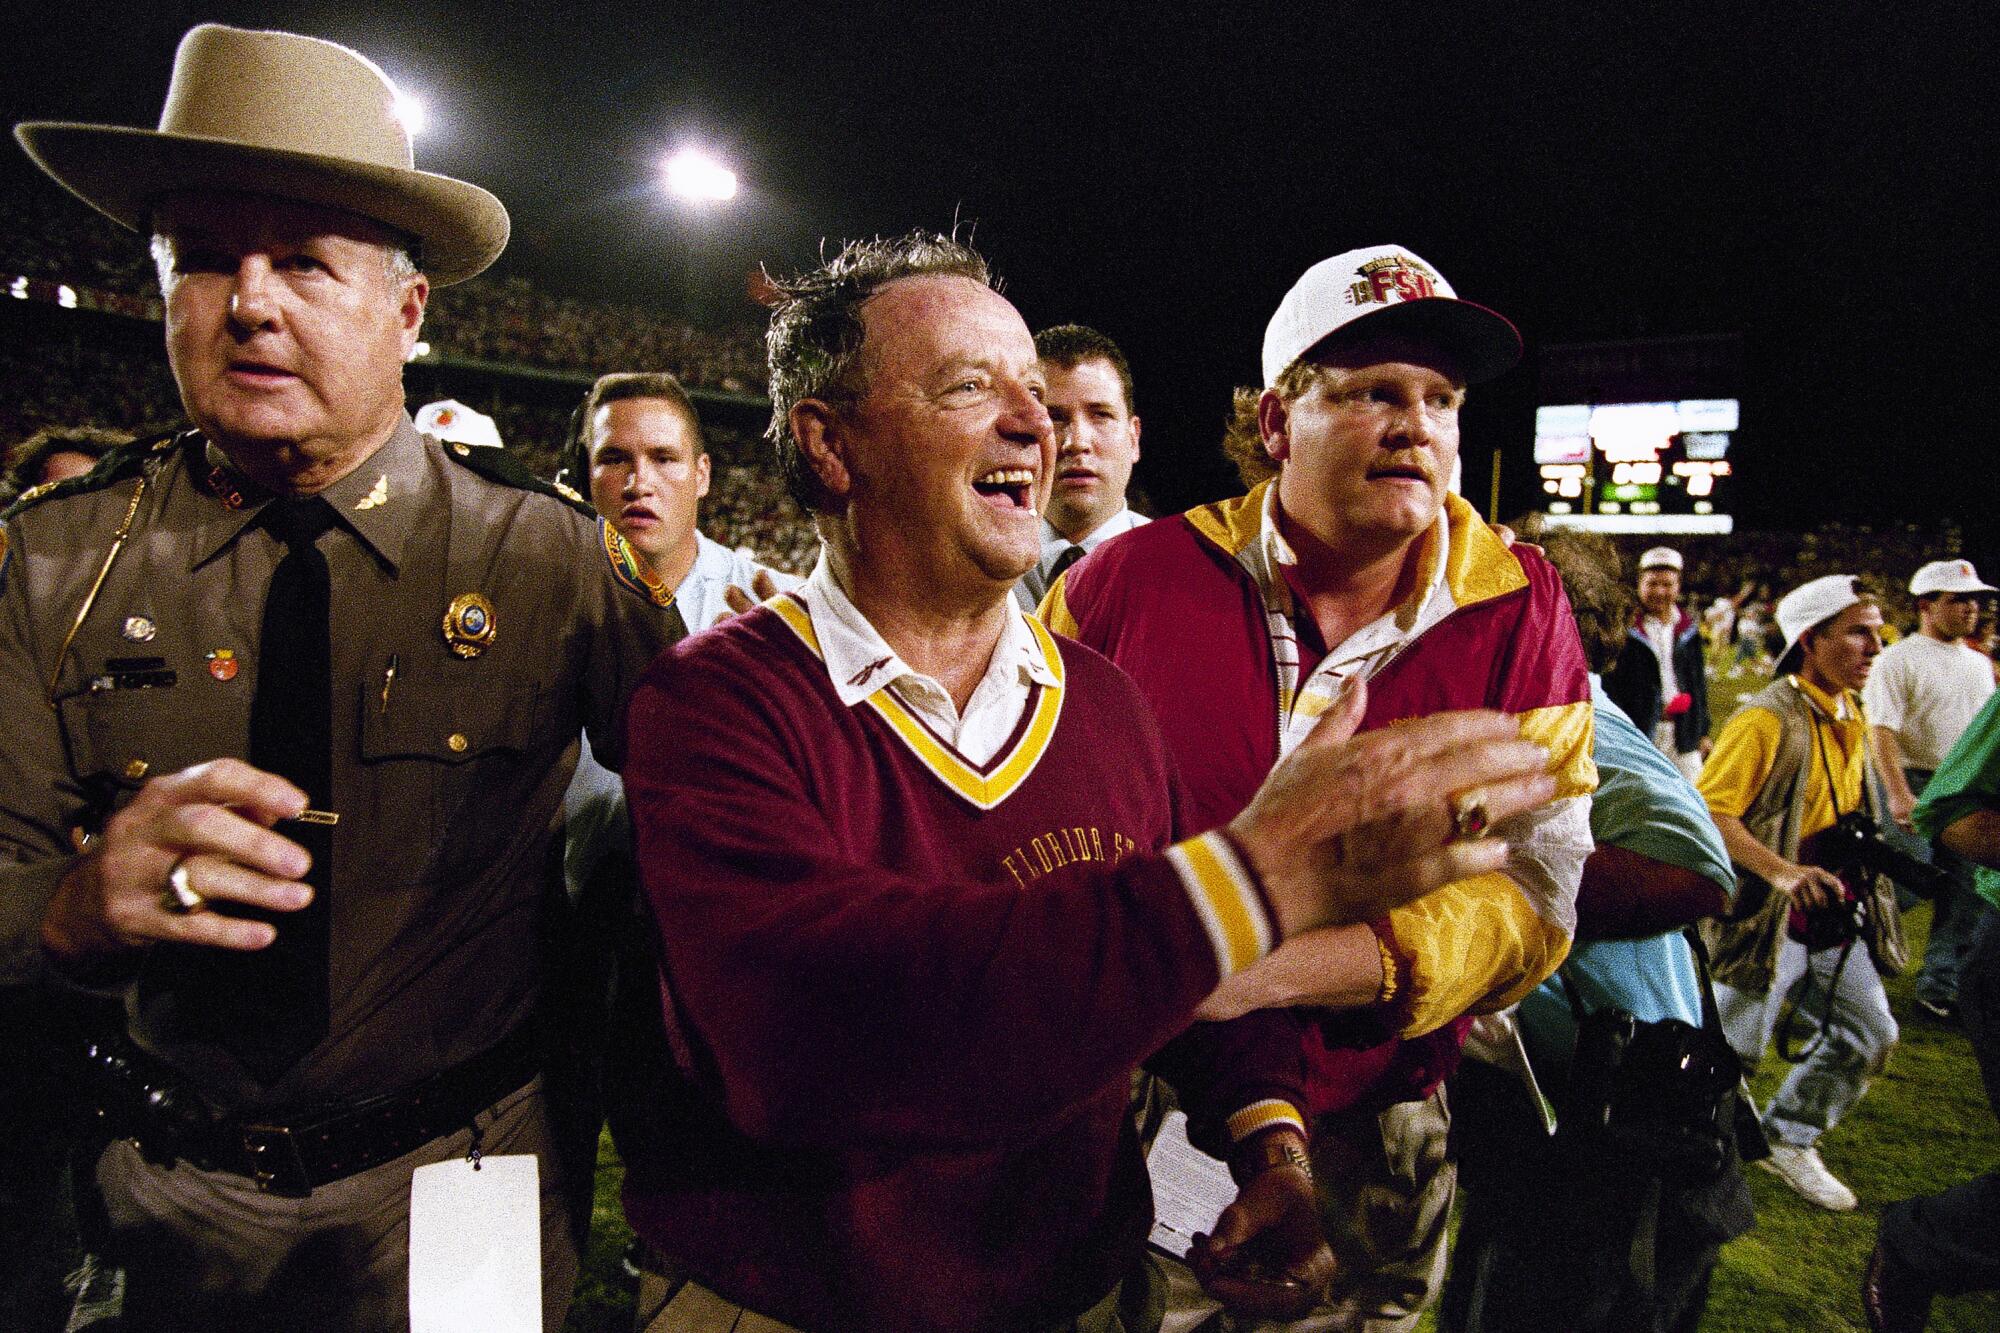 Bobby Bowden, smiling, stands with a crowd of other people on the football field.